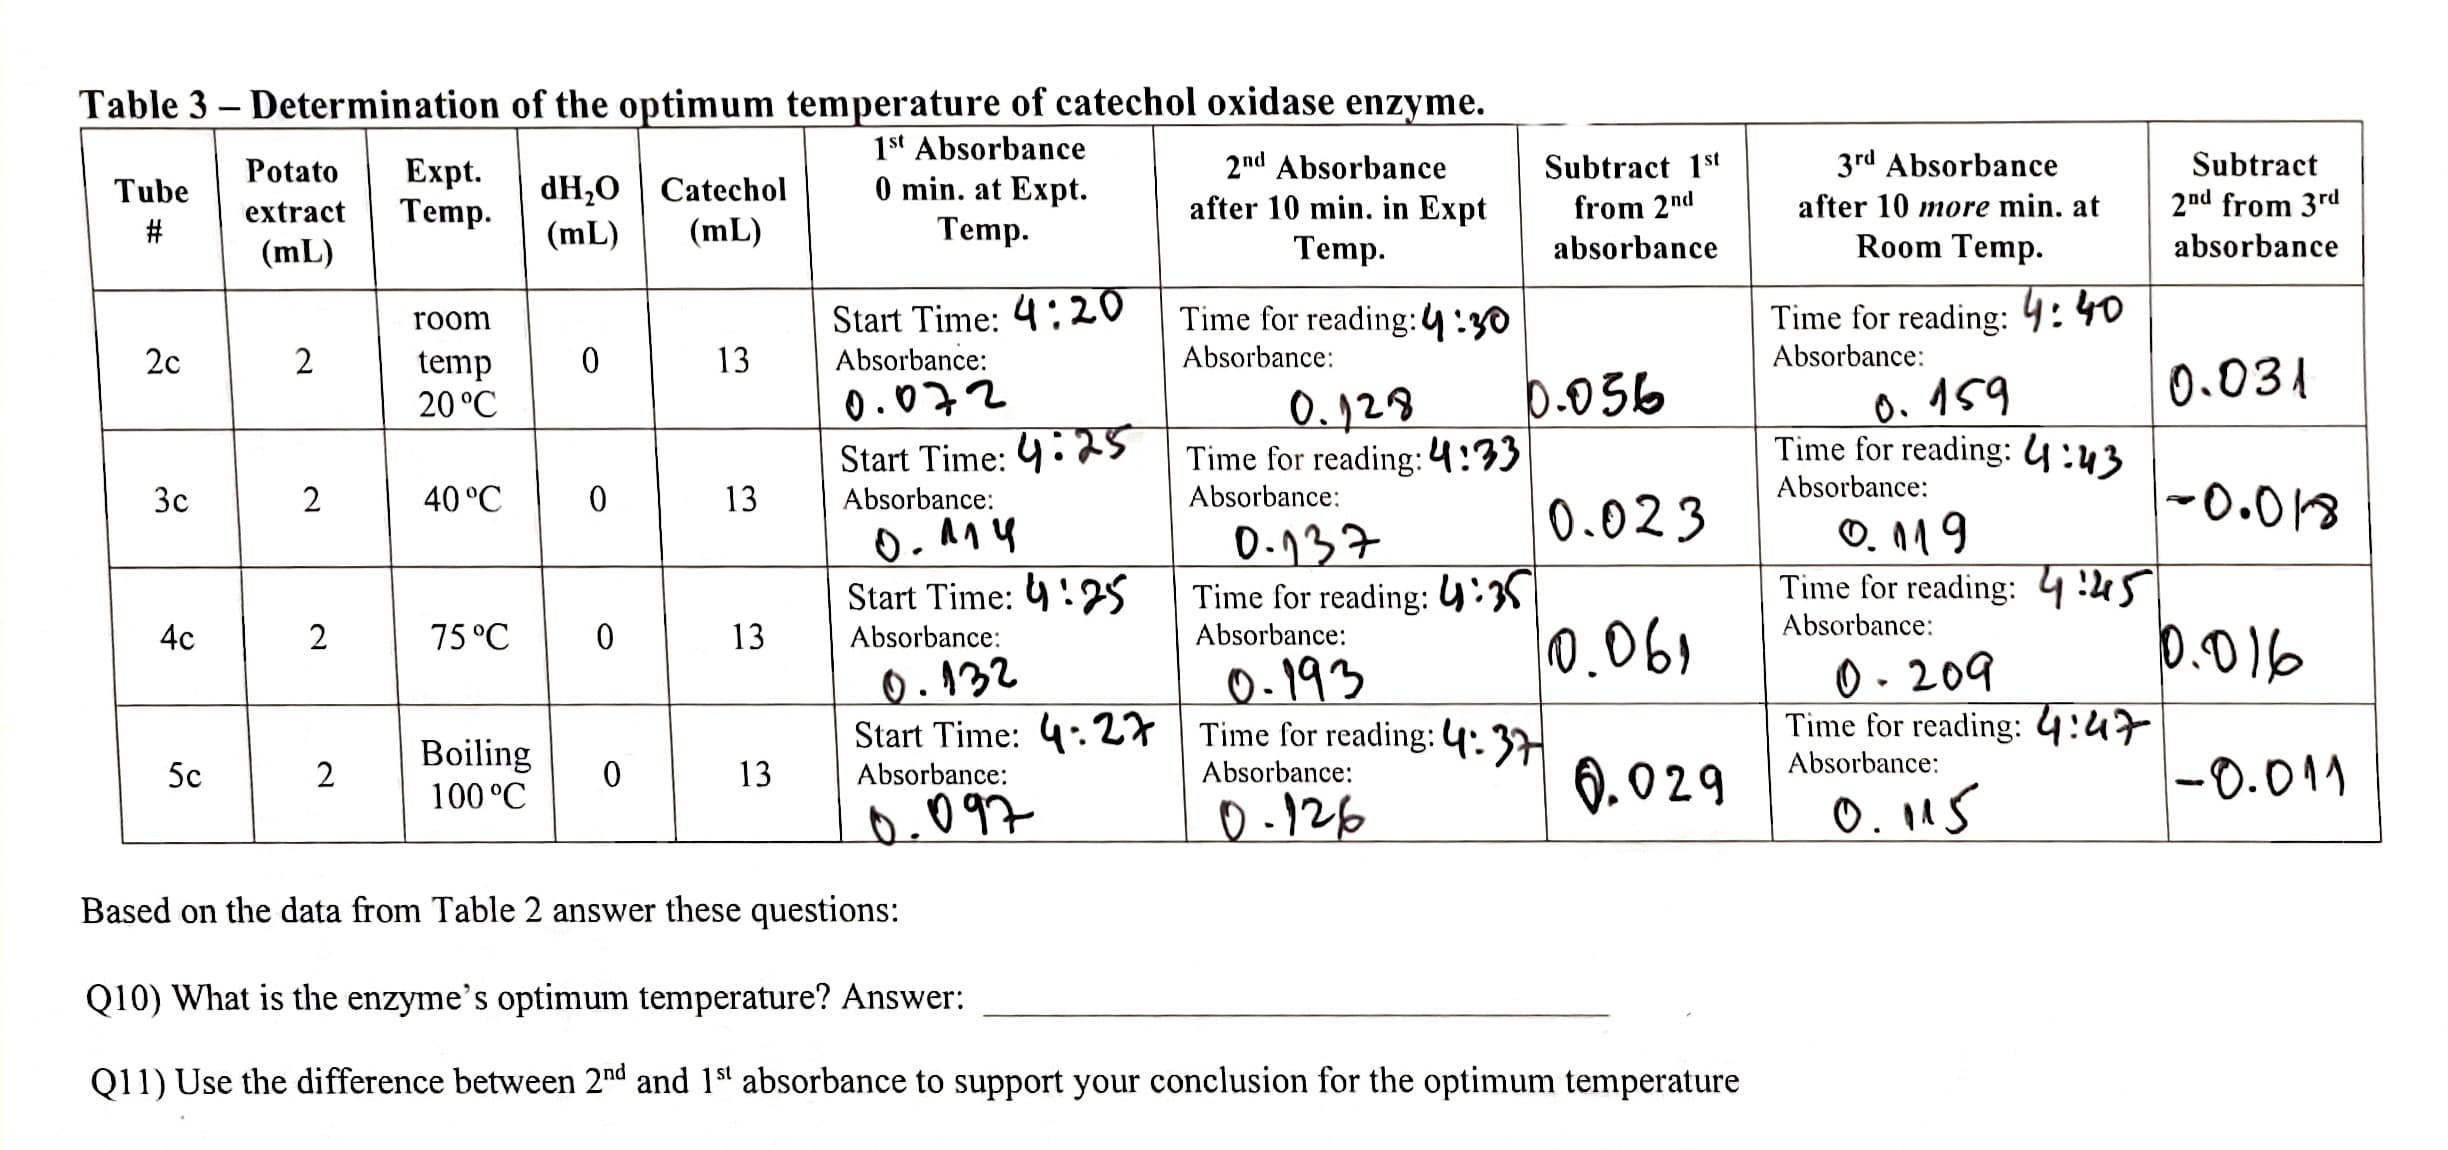 Table 3-Determination
Tube
#
Potato Expt.
Temp.
2c
3c
4c
5c
extract
(mL)
2
2
2
2
room
temp
20 °C
40 °C
75 °C
of the optimum temperature of catechol oxidase enzyme.
1st Absorbance
0 min. at Expt.
Temp.
Boiling
100 °C
dH₂O Catechol
(mL) (mL)
0
0
0
0
13
13
13
13
Start Time: 4:20
Absorbance:
0.072
Start Time: 4:25
Absorbance:
0.114
Start Time:
Absorbance:
25
0.132
Start Time: 4:27
Absorbance:
0.097
2nd Absorbance
after 10 min. in Expt
Temp.
Time for reading: 4:30
Absorbance:
0.128
Time for reading: 4:33
Absorbance:
0.036
0-137
Time for reading: 4:35
Absorbance:
Subtract 1st
from 2nd
absorbance
0.193
Time for reading: 4:37
Absorbance:
0-126
0.023
0.061
0.029
Based on the data from Table 2 answer these questions:
Q10) What is the enzyme's optimum temperature? Answer:
Q11) Use the difference between 2nd and 1st absorbance to support your conclusion for the optimum temperature
3rd Absorbance
after 10 more min. at
Room Temp.
Time for reading: 4:40
Absorbance:
0.159
Time for reading: 4:43
Absorbance:
0.119
Time for reading: 4:45
Absorbance:
0-209
Time for reading: 4:47
Absorbance:
0.115
Subtract
2nd from 3rd
absorbance
0.031
1-0.018
10.016
-0.011